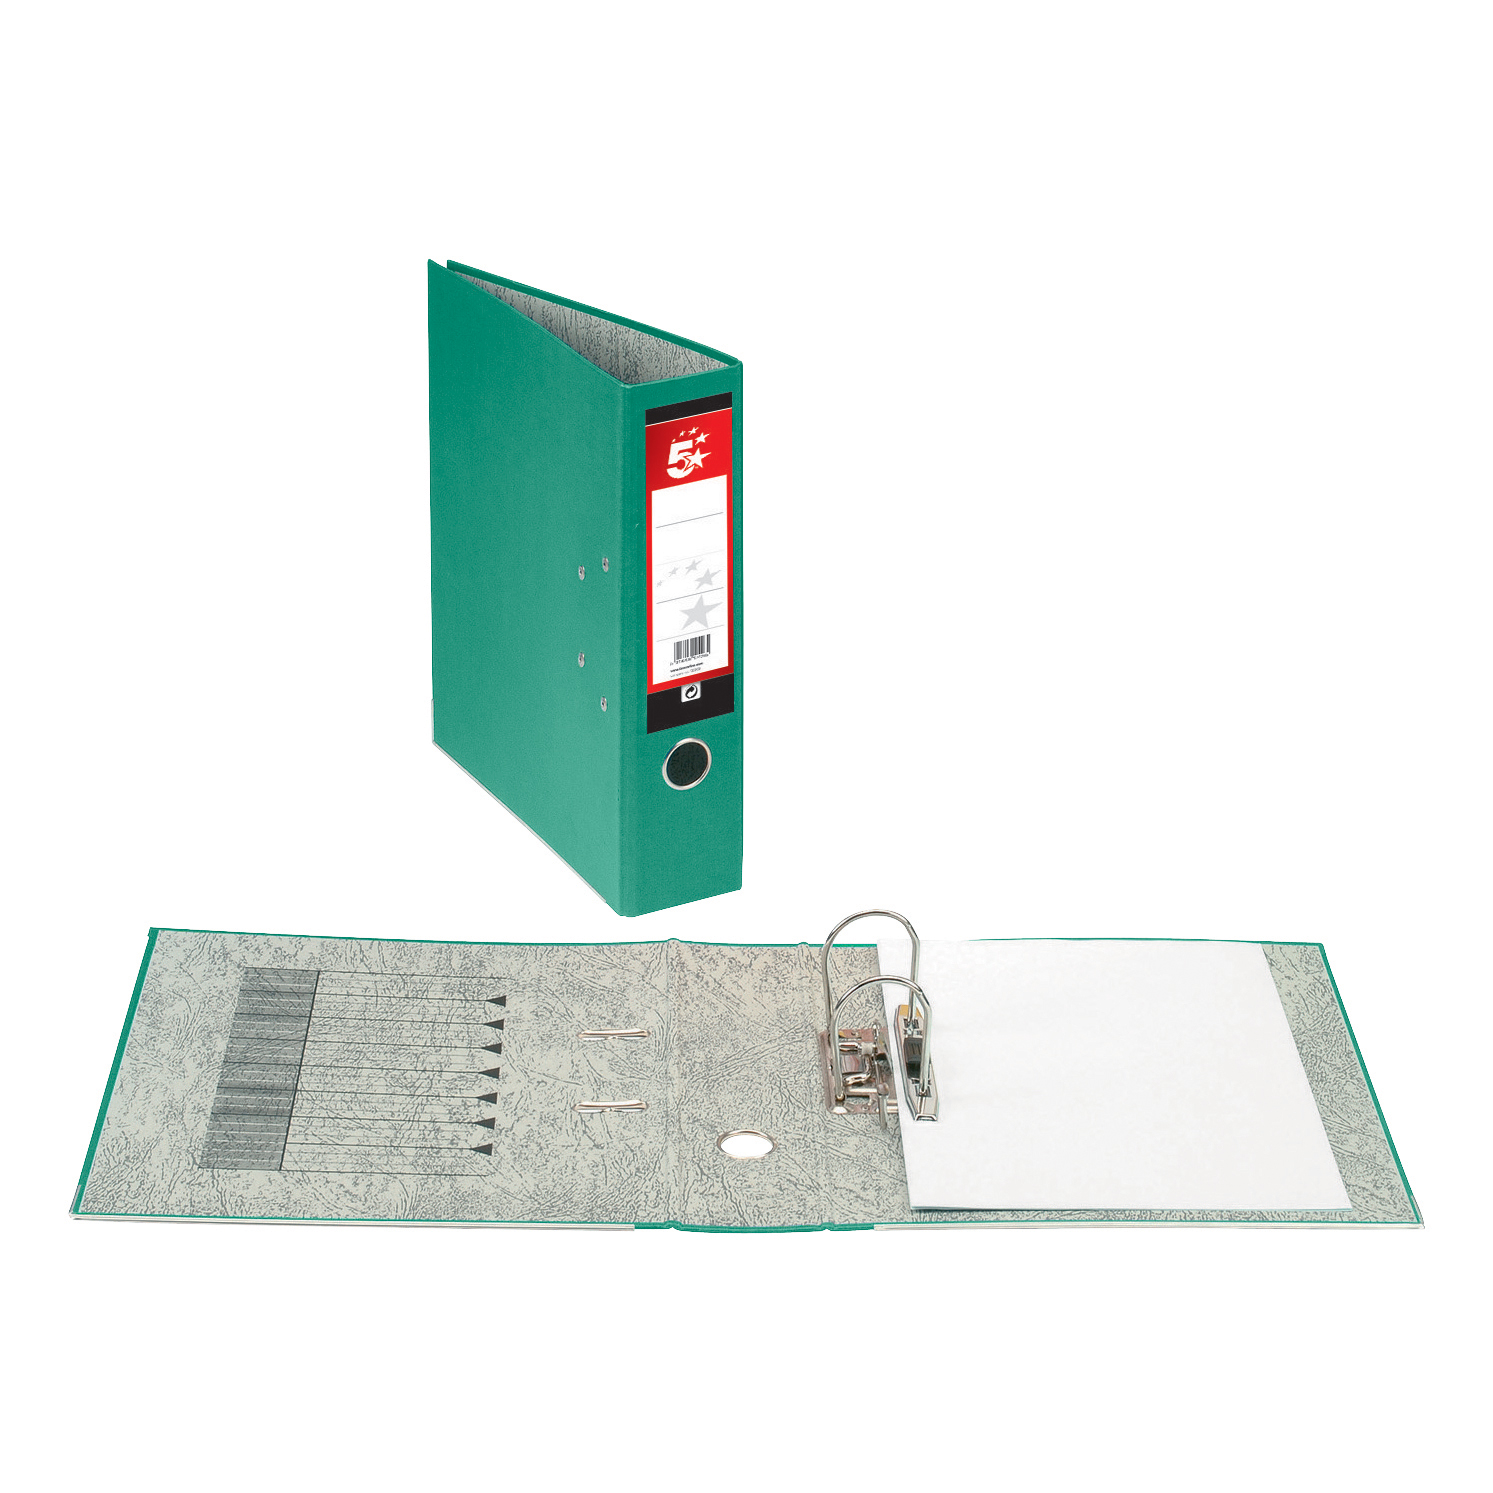 5 Star Office Lever Arch File 70mm Spine A4 Green